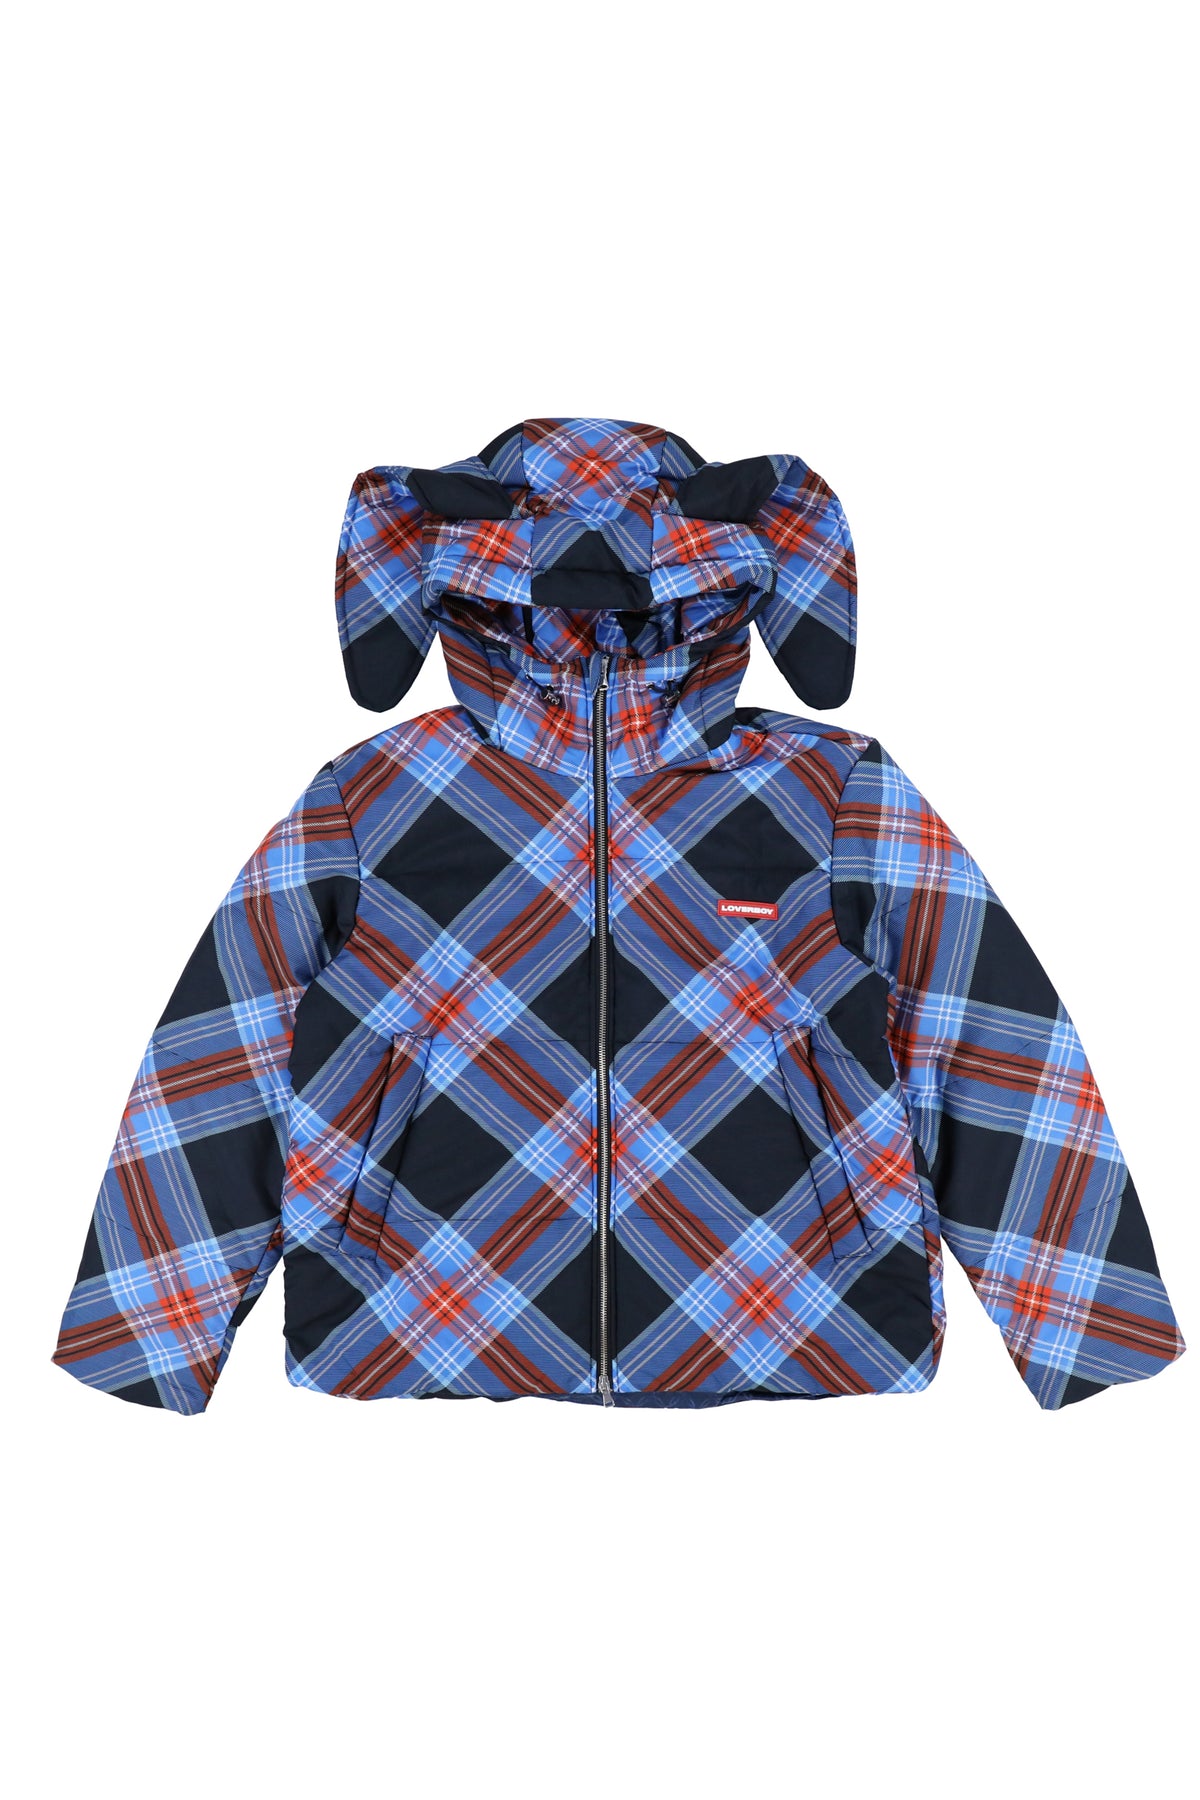 BUNNY PUFFER JACKET / BLK BLU RED CHECK